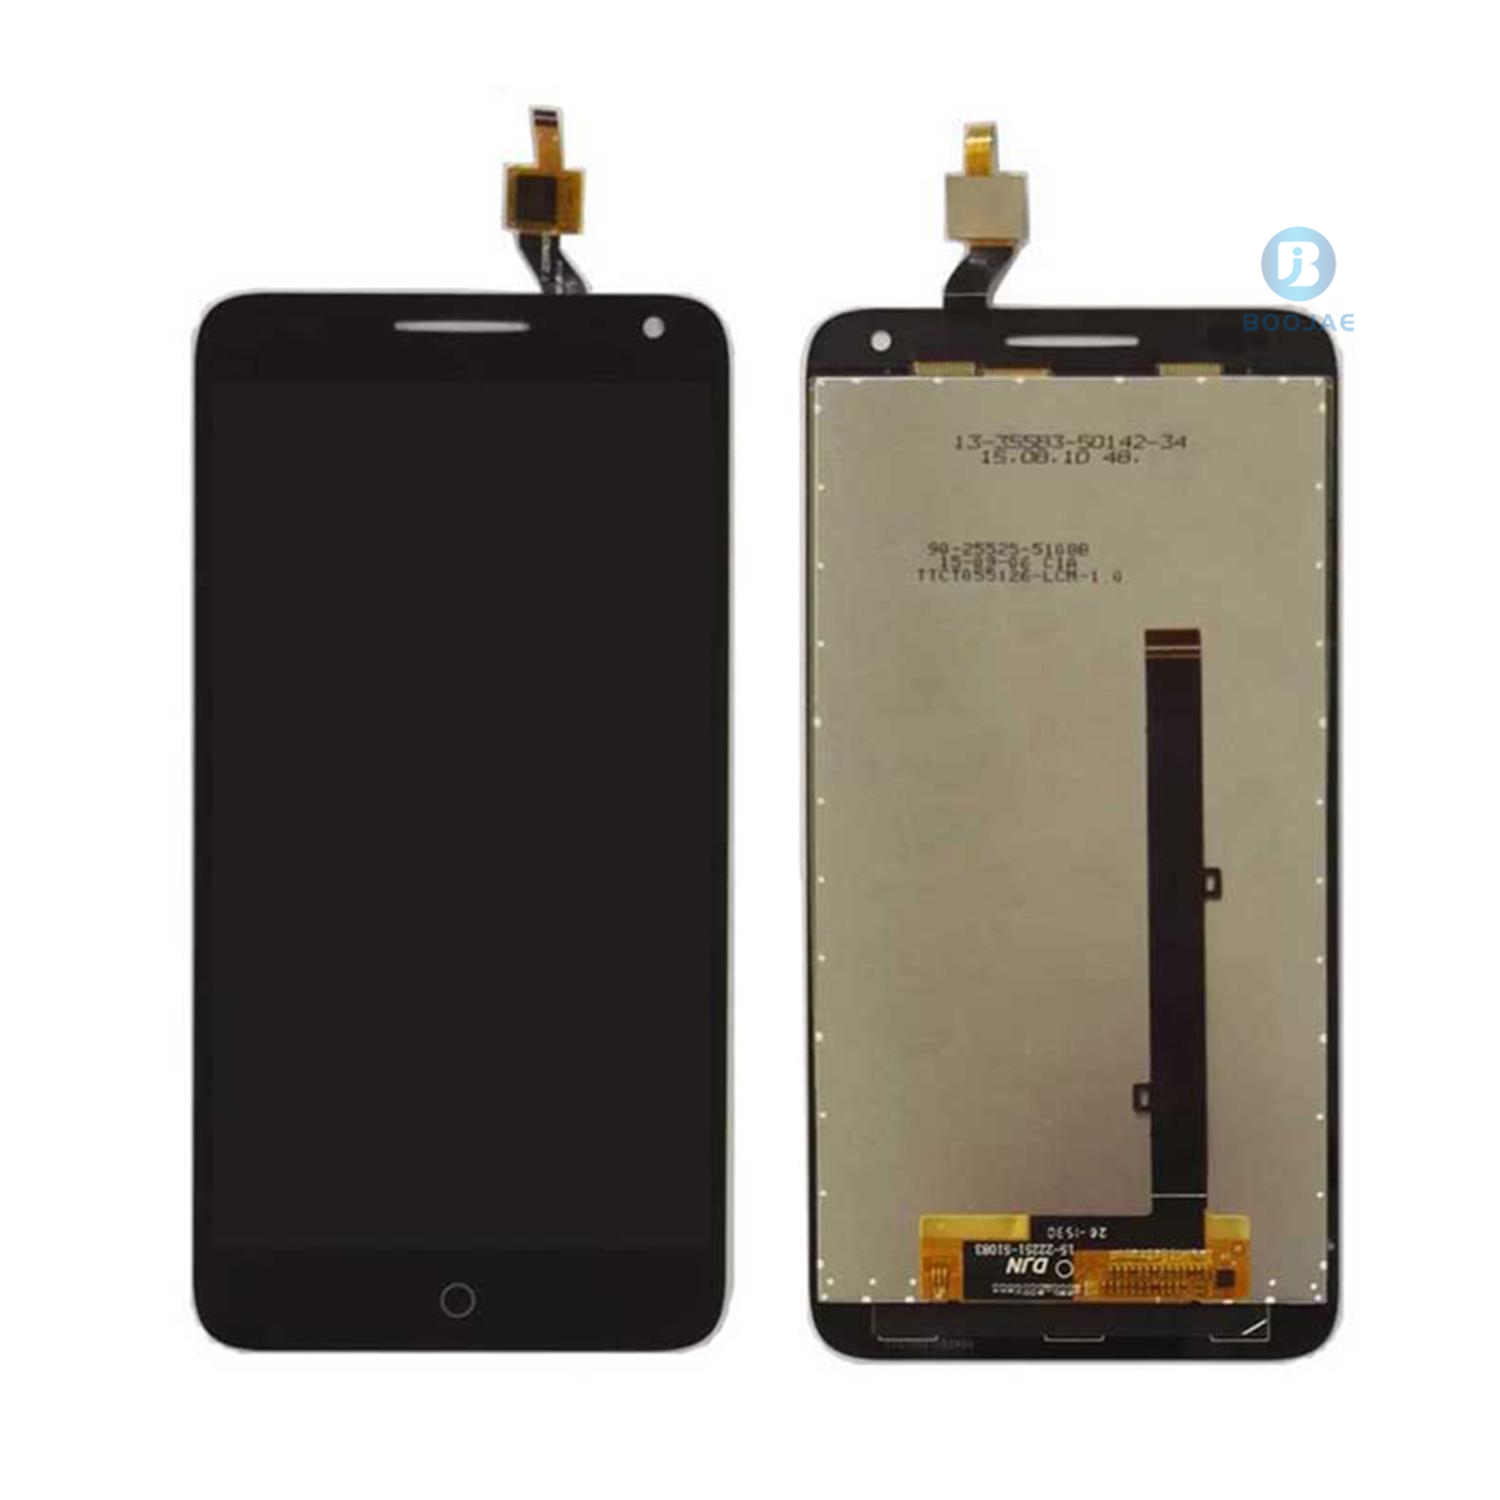 Alcatel 5025 LCD Screen Display, Lcd Assembly Replacement